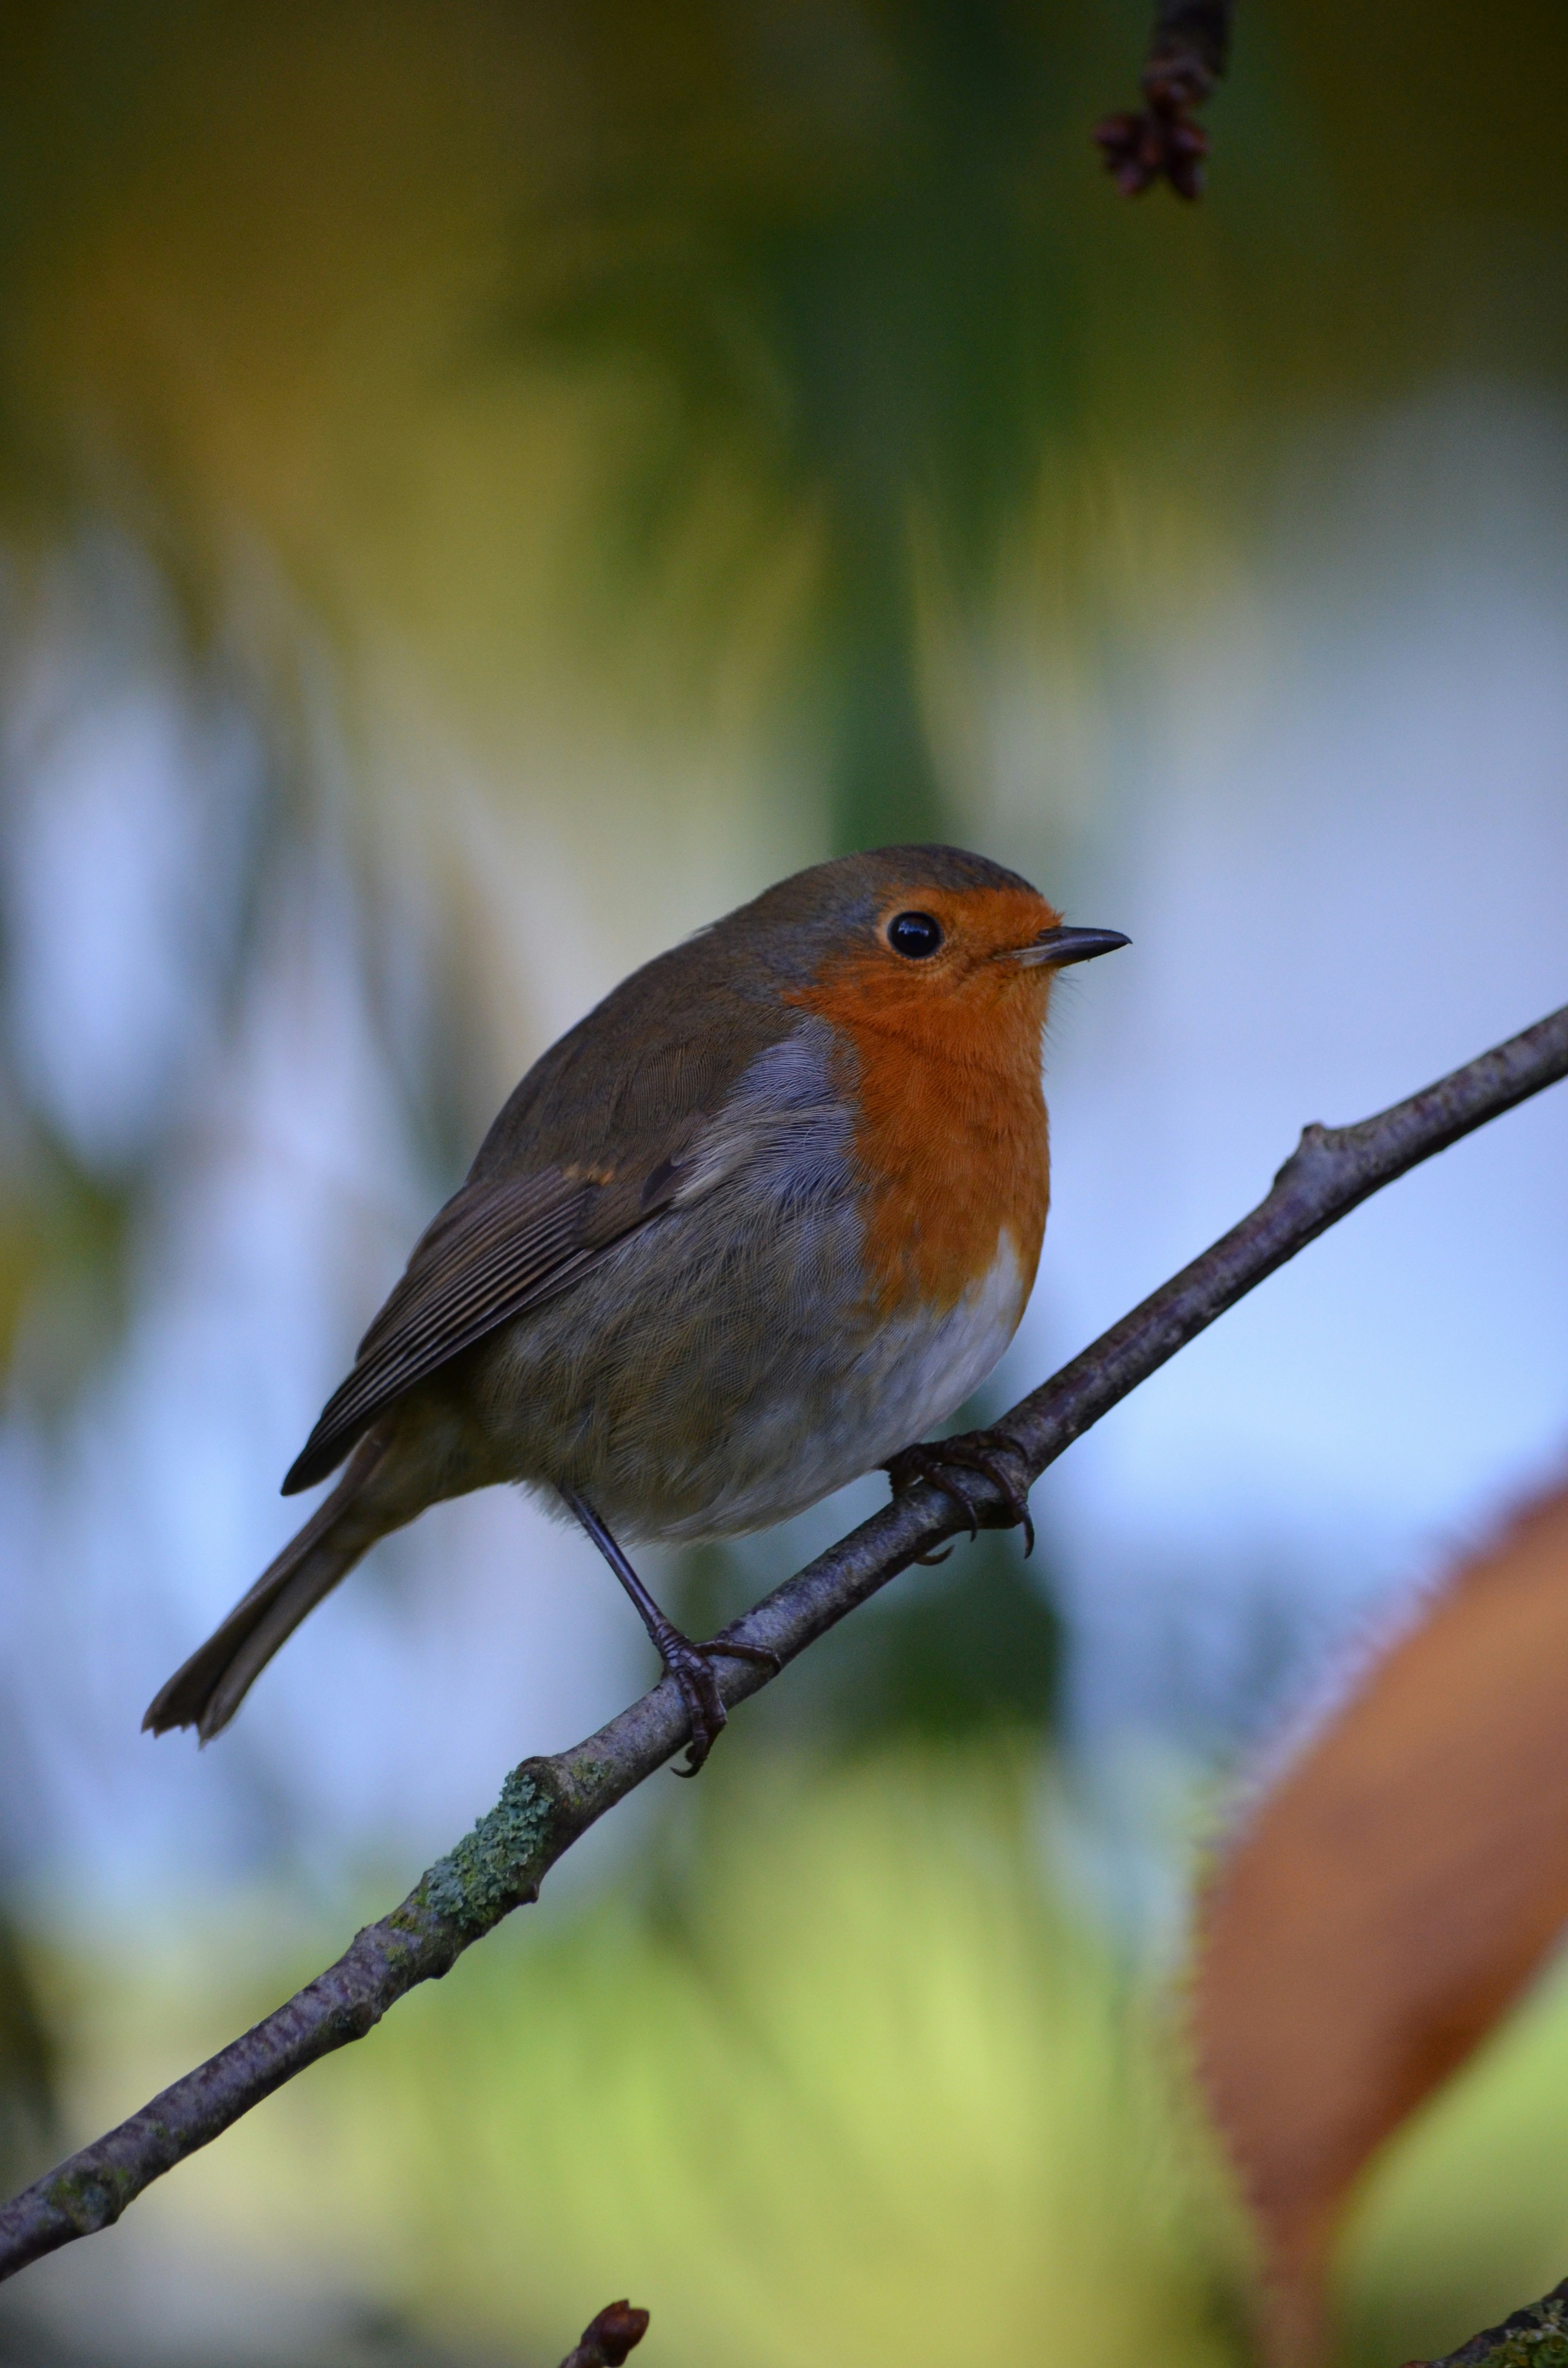 A brave Robin redbreast who seemed to be interested in cameras.